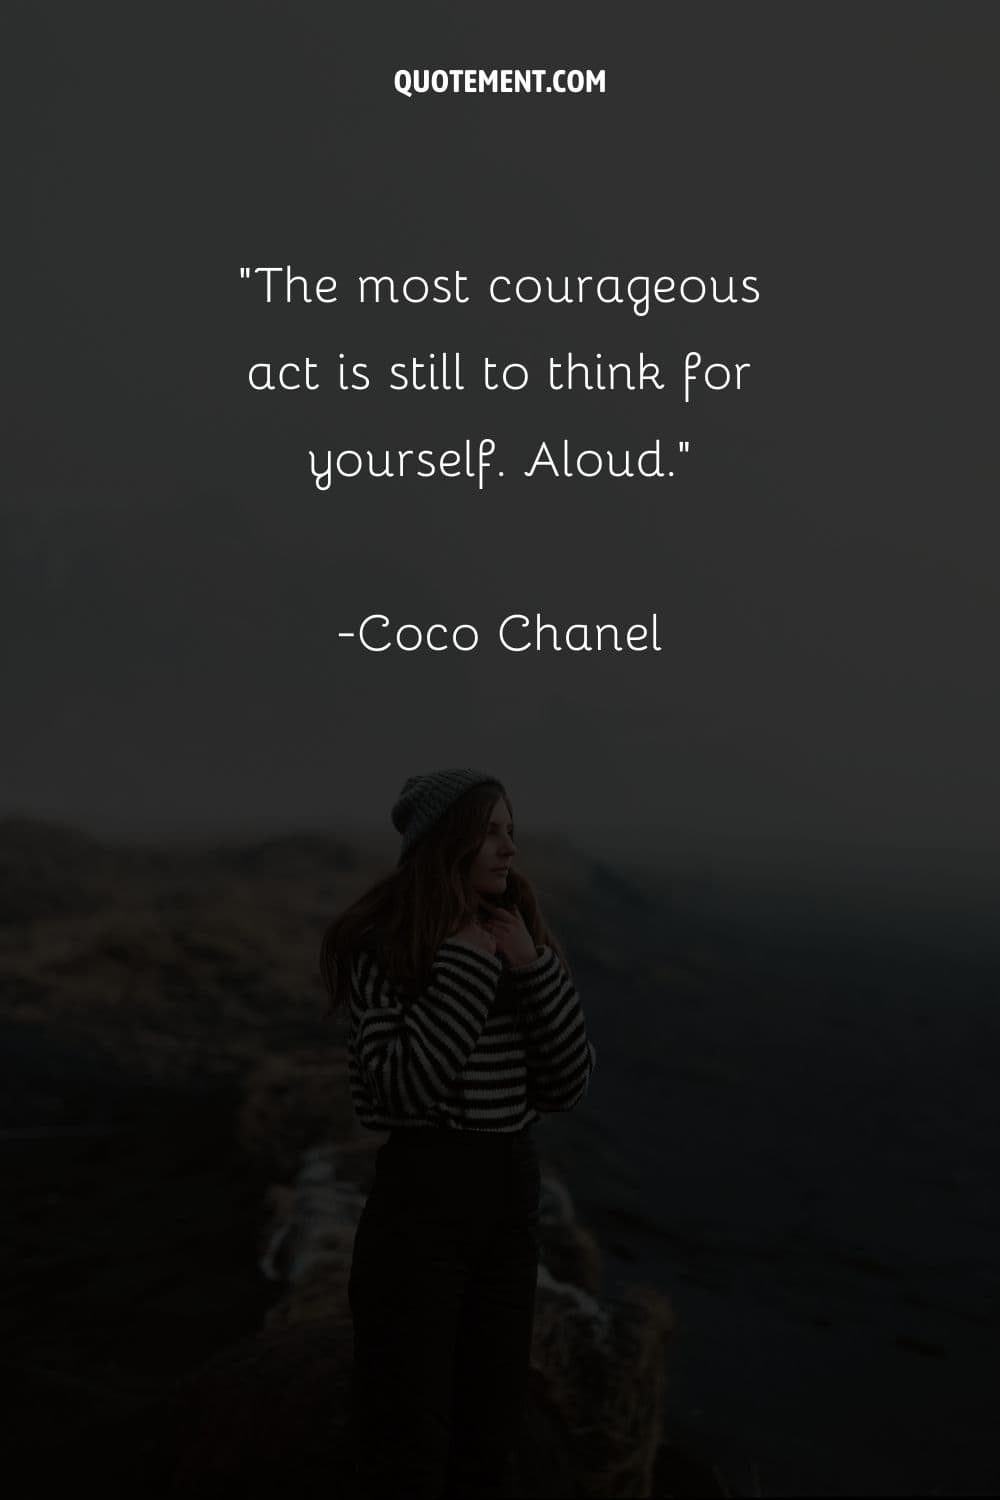 Image of a girl amidst breathtaking landscapes representing a quote about courage.